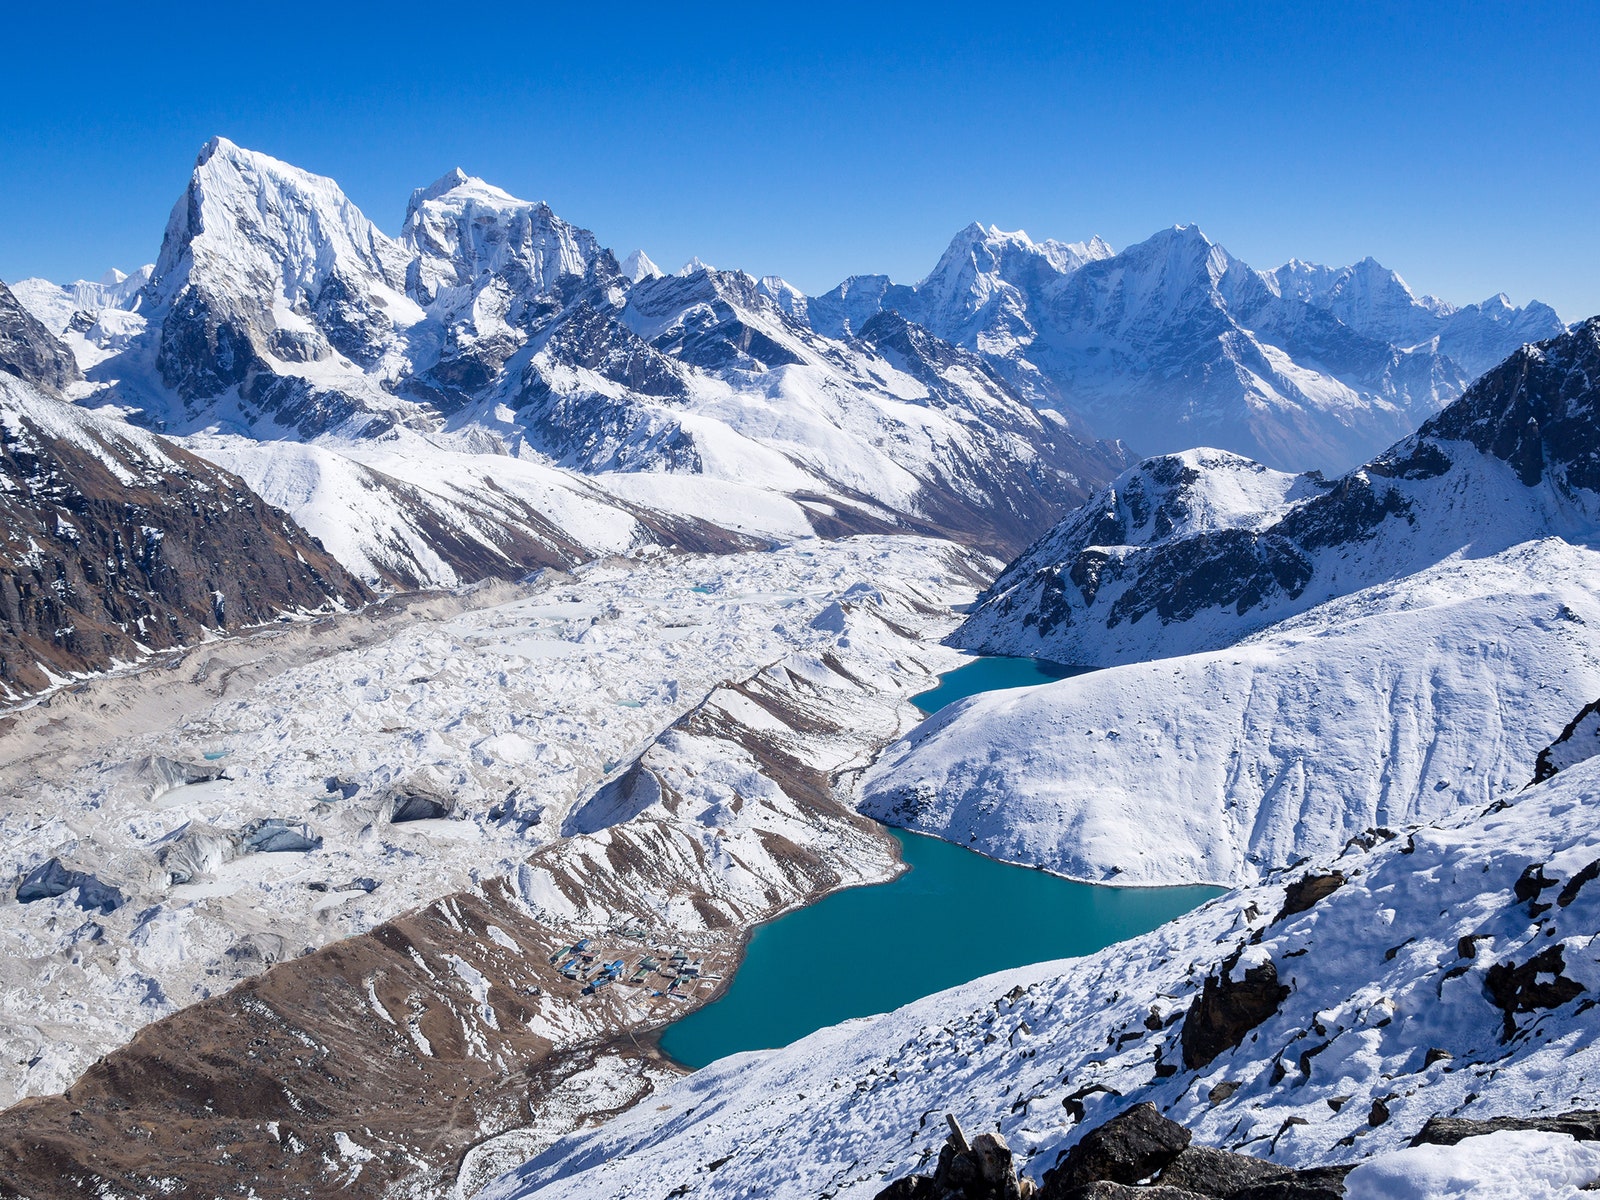 It’s That Easy — Get More Than 17/25 on This Geography Test to Win Mountains in Nepal